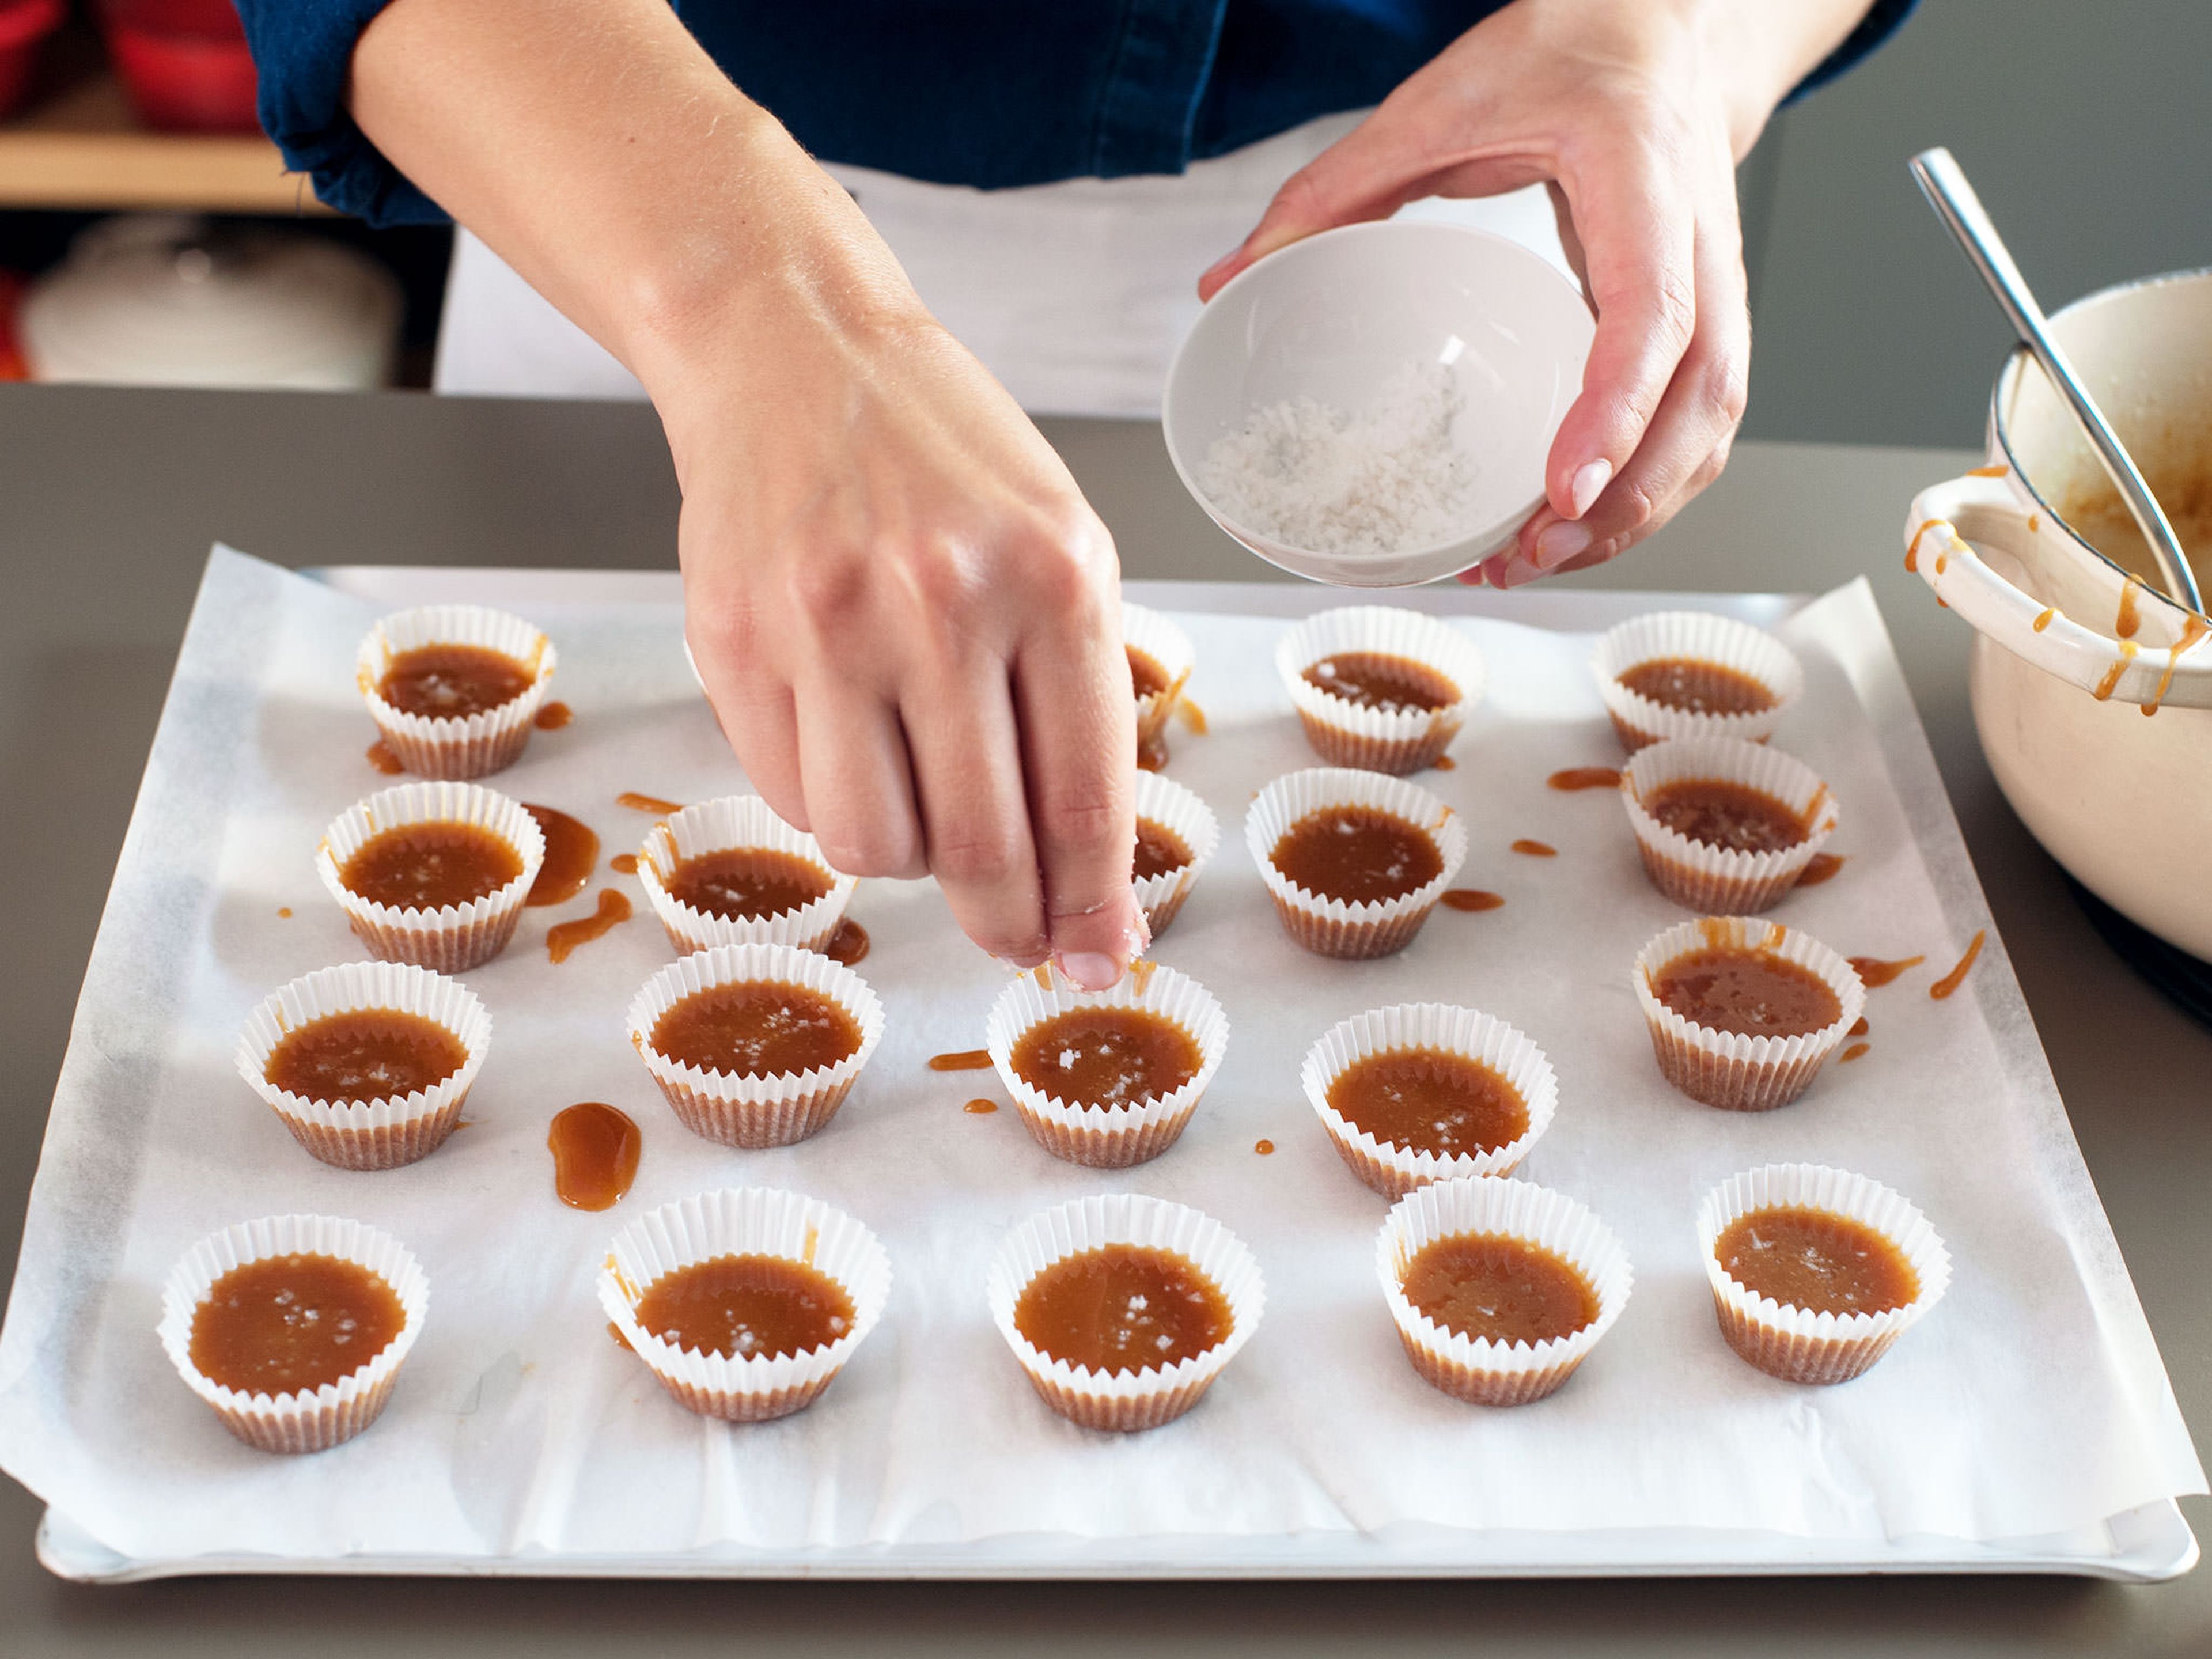 Spoon caramel into wrappers, sprinkle with flaky salt, and set aside to cool completely. Transfer caramels to an airtight container and store in the refrigerator until ready to serve.